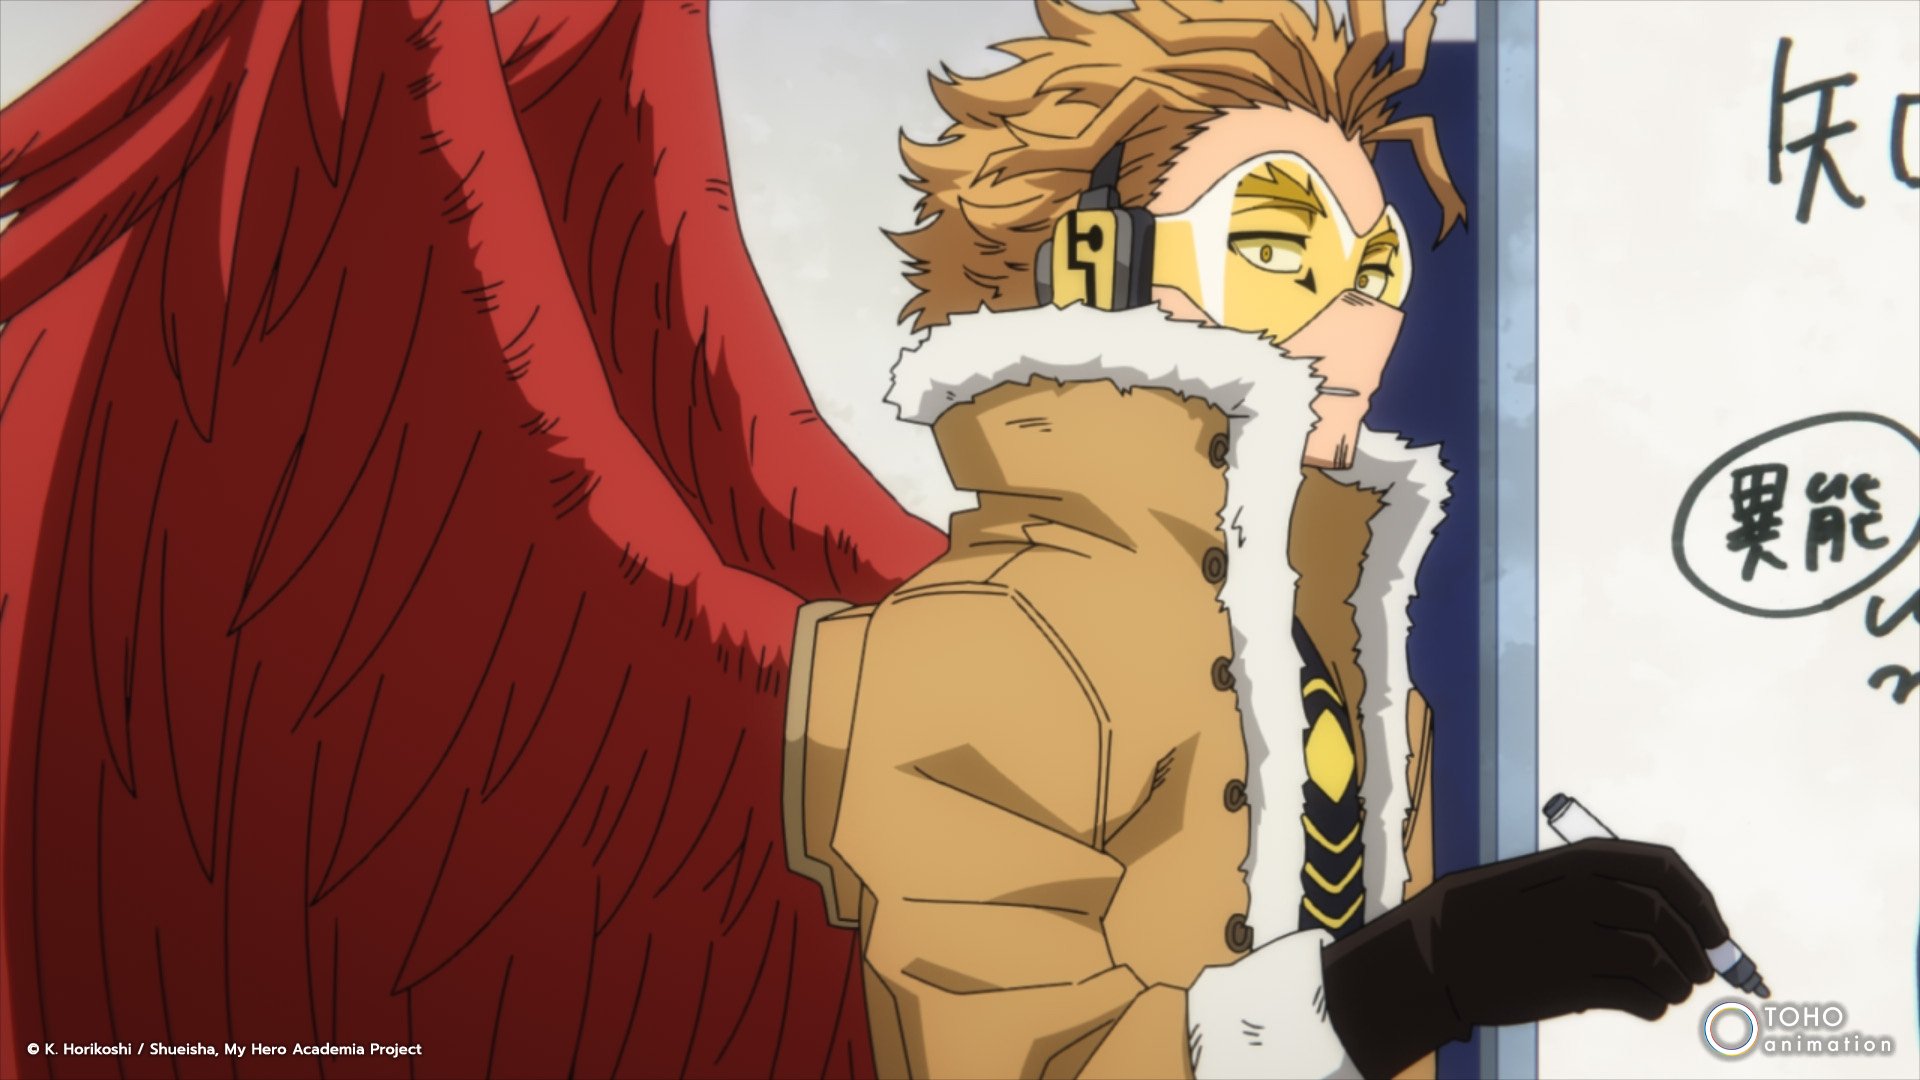 cool nizam recommends pictures of hawks from my hero academia pic